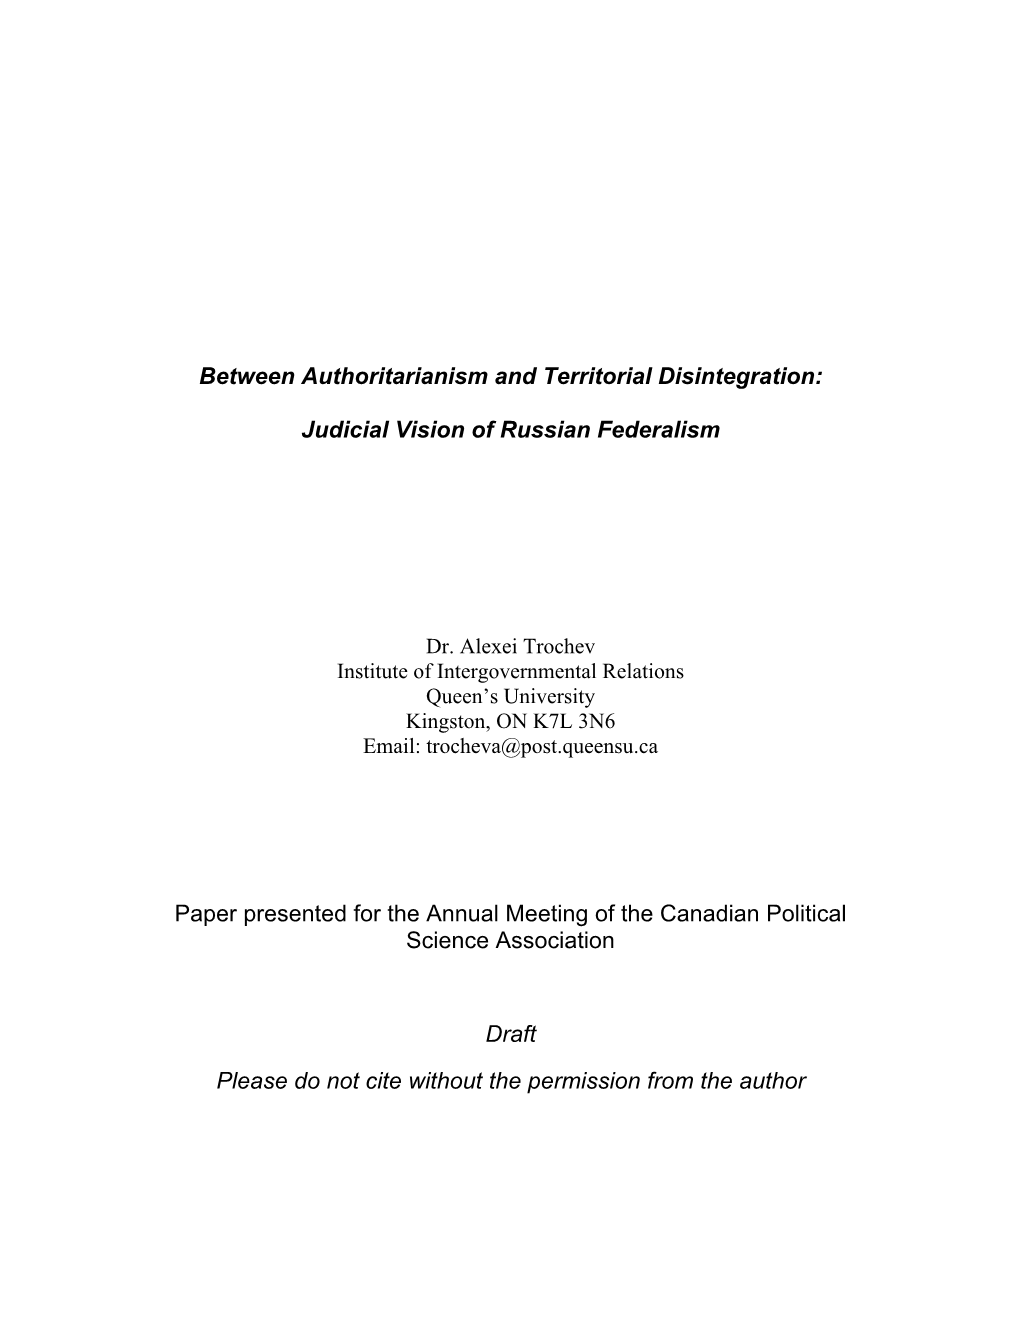 This Paper Is About the Role of the Russian Constitutional Court In